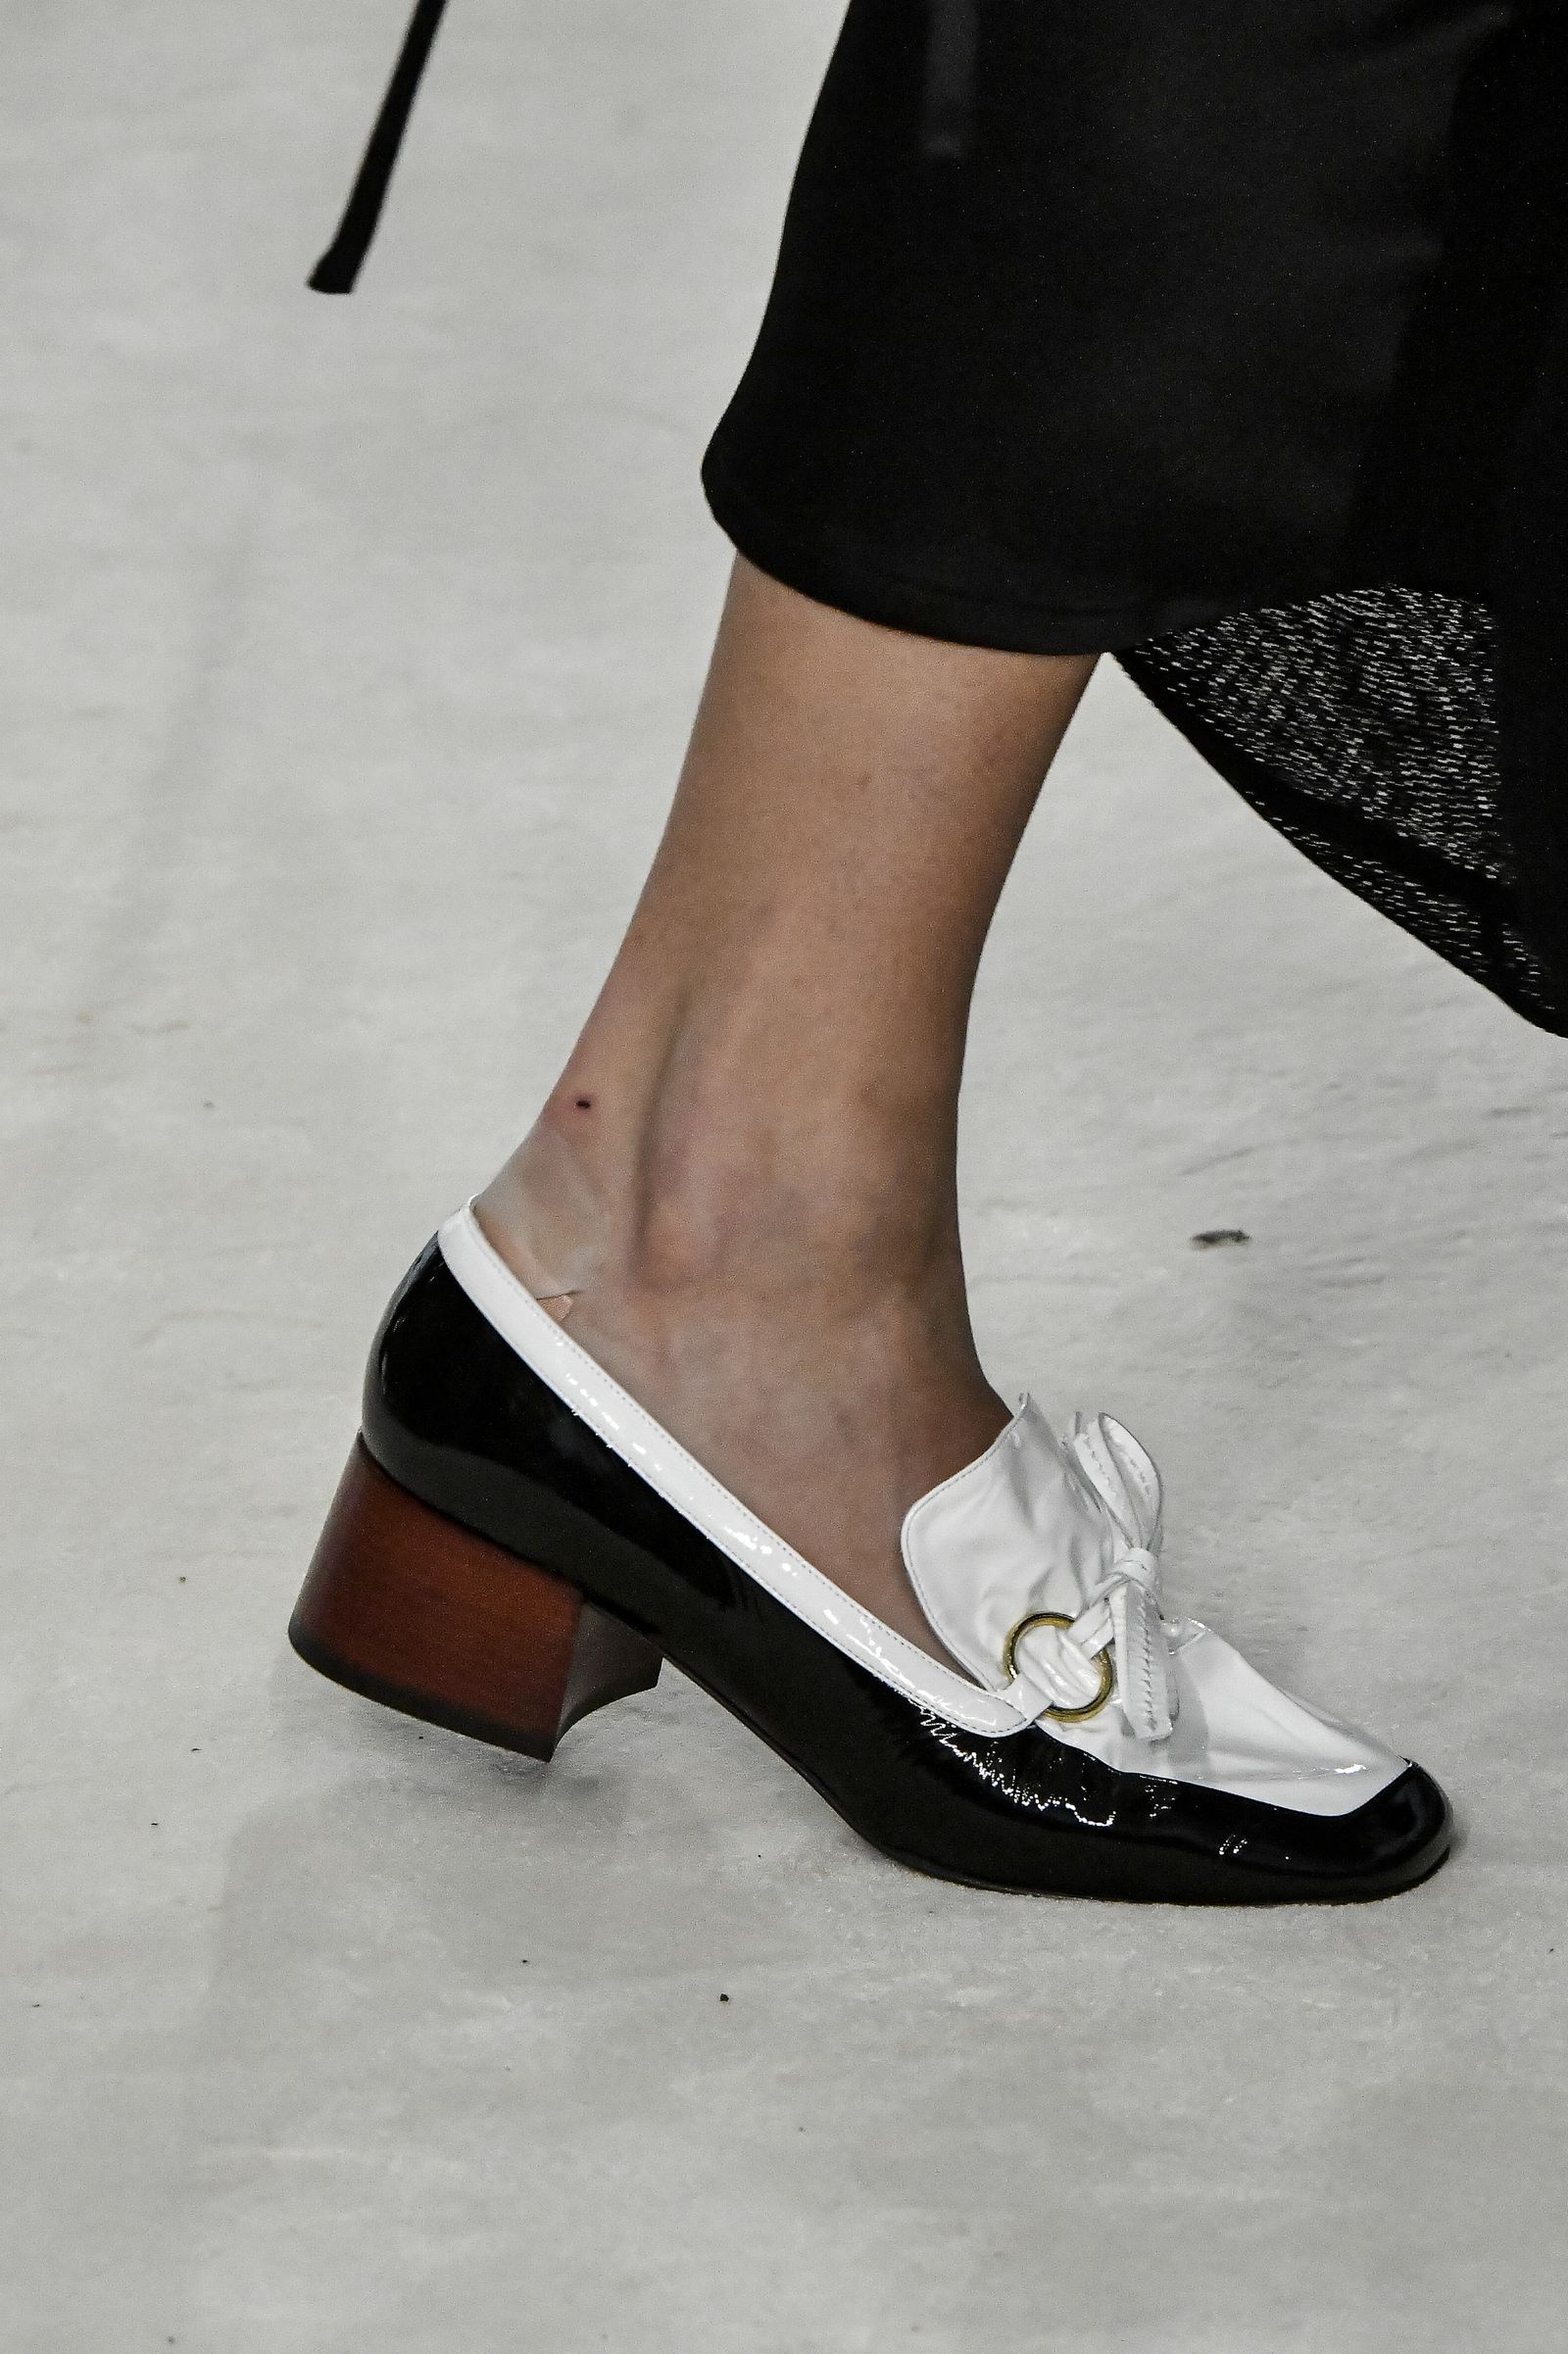 Heeled Loafers Will Be Spring's Biggest Shoe Trend | Who What Wear